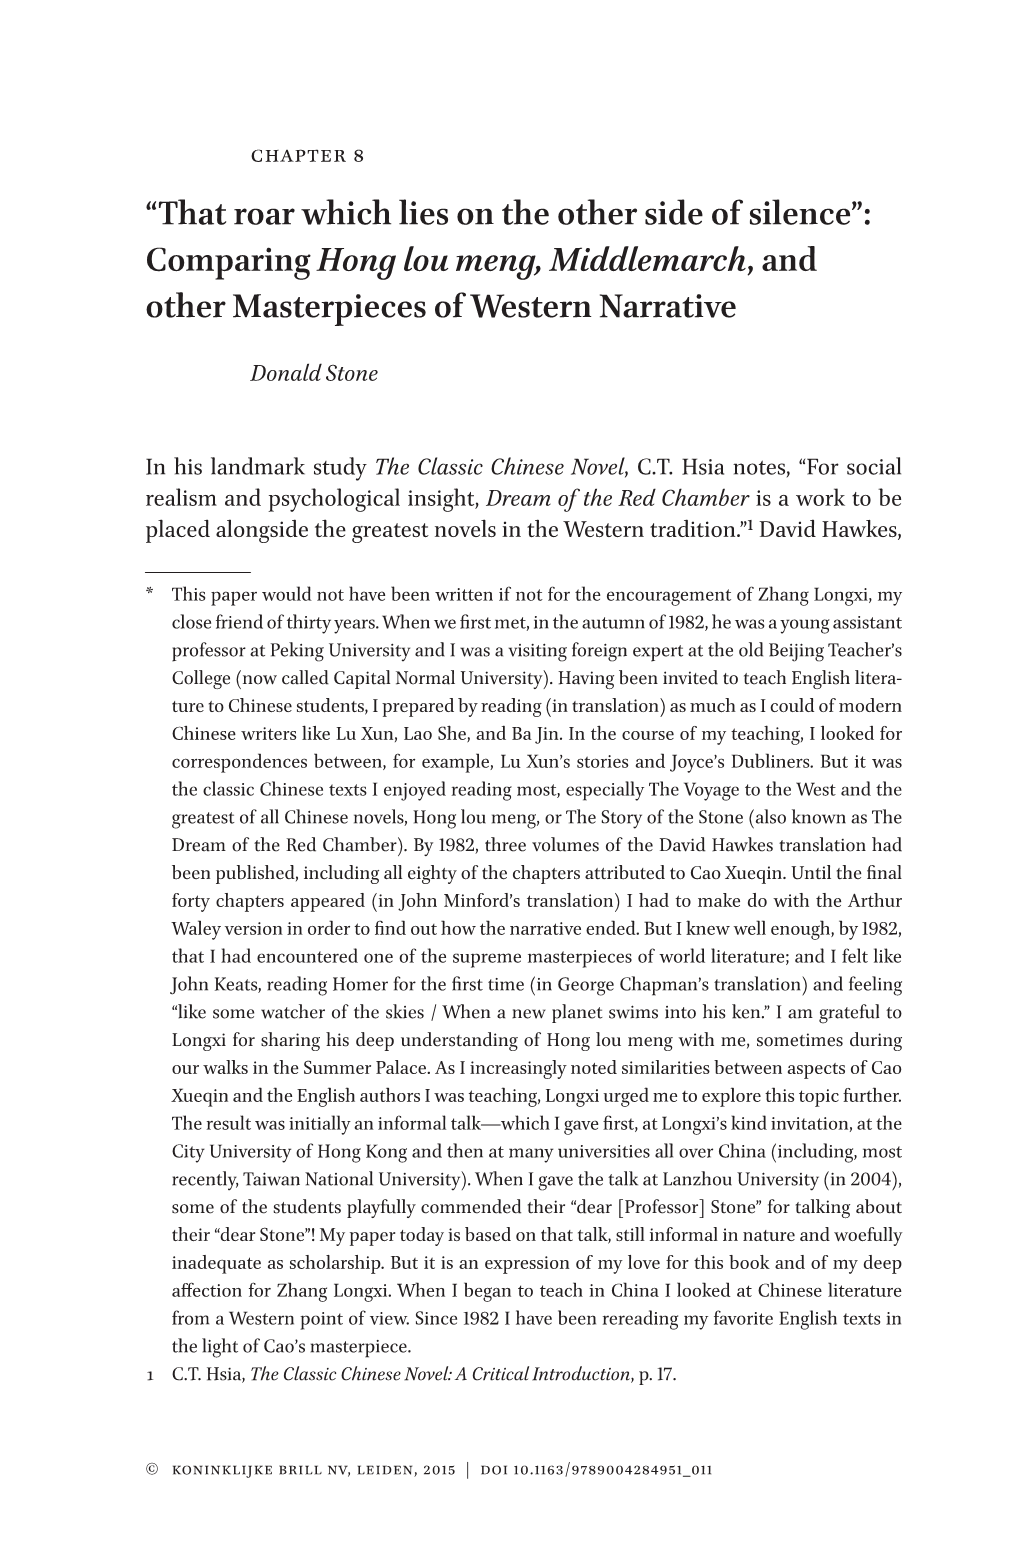 Comparing Hong Lou Meng, Middlemarch, and Other Masterpieces of Western Narrative